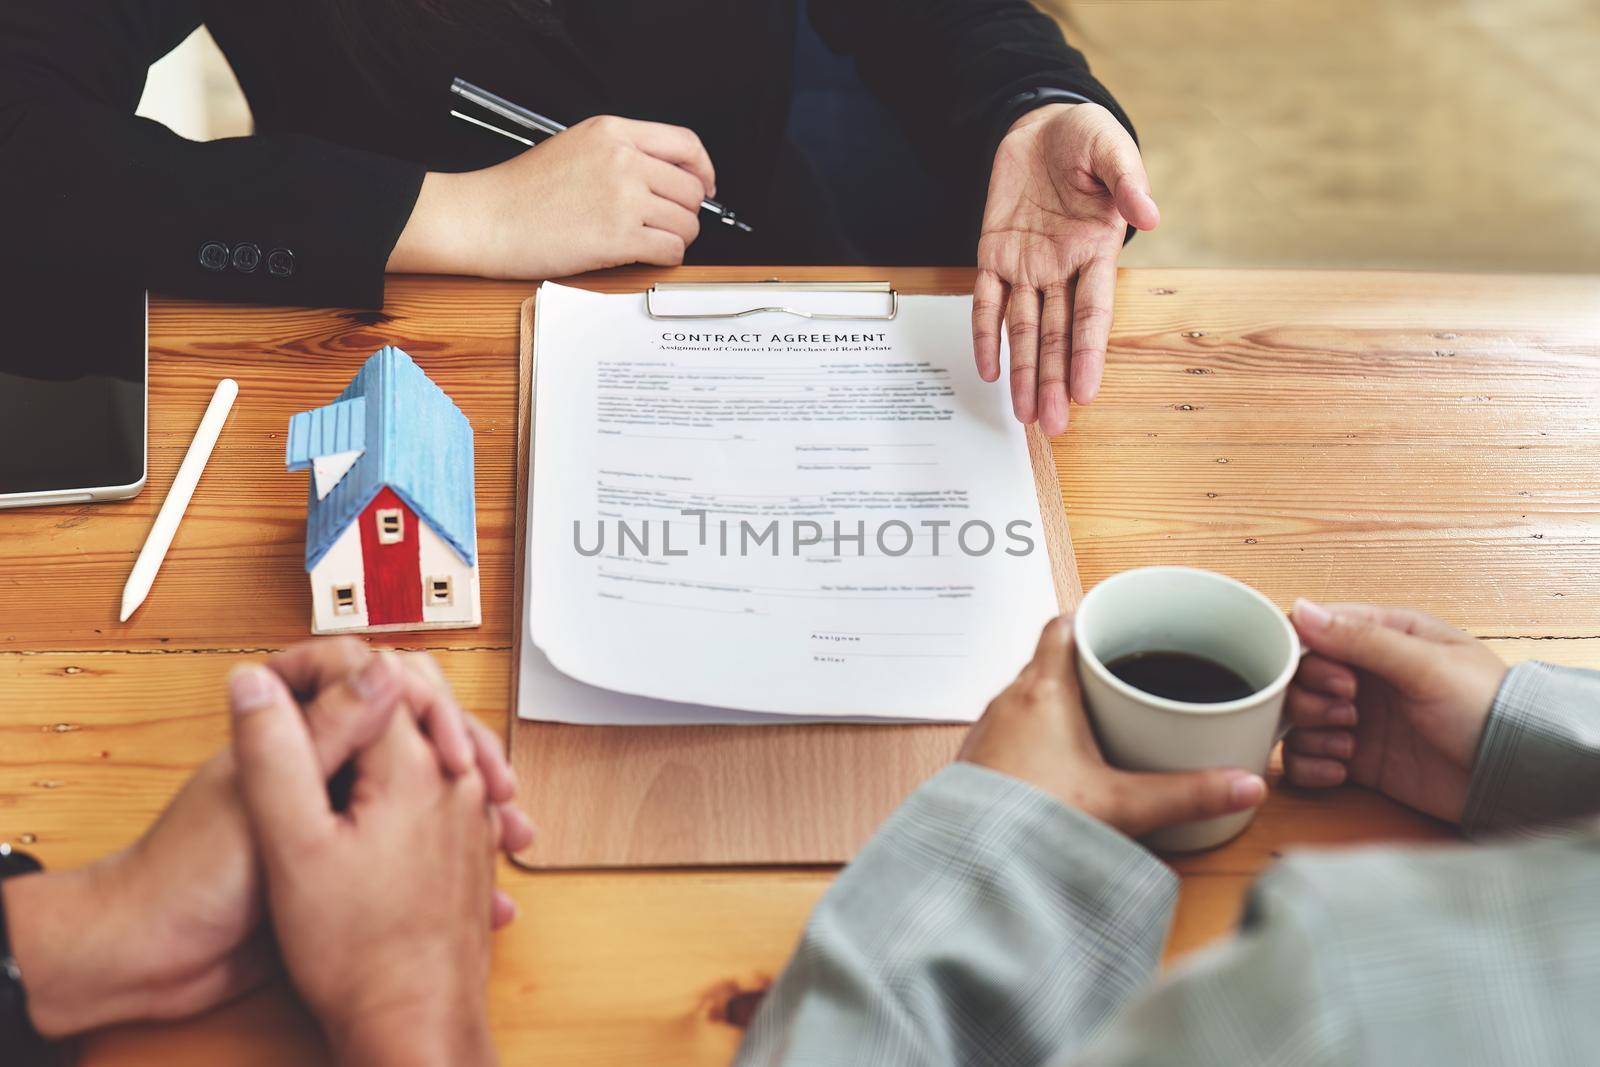 A spouse entering a home contract is reading the terms of the loan interest agreement that the bank officer or real estate agent is offering before signing by Manastrong